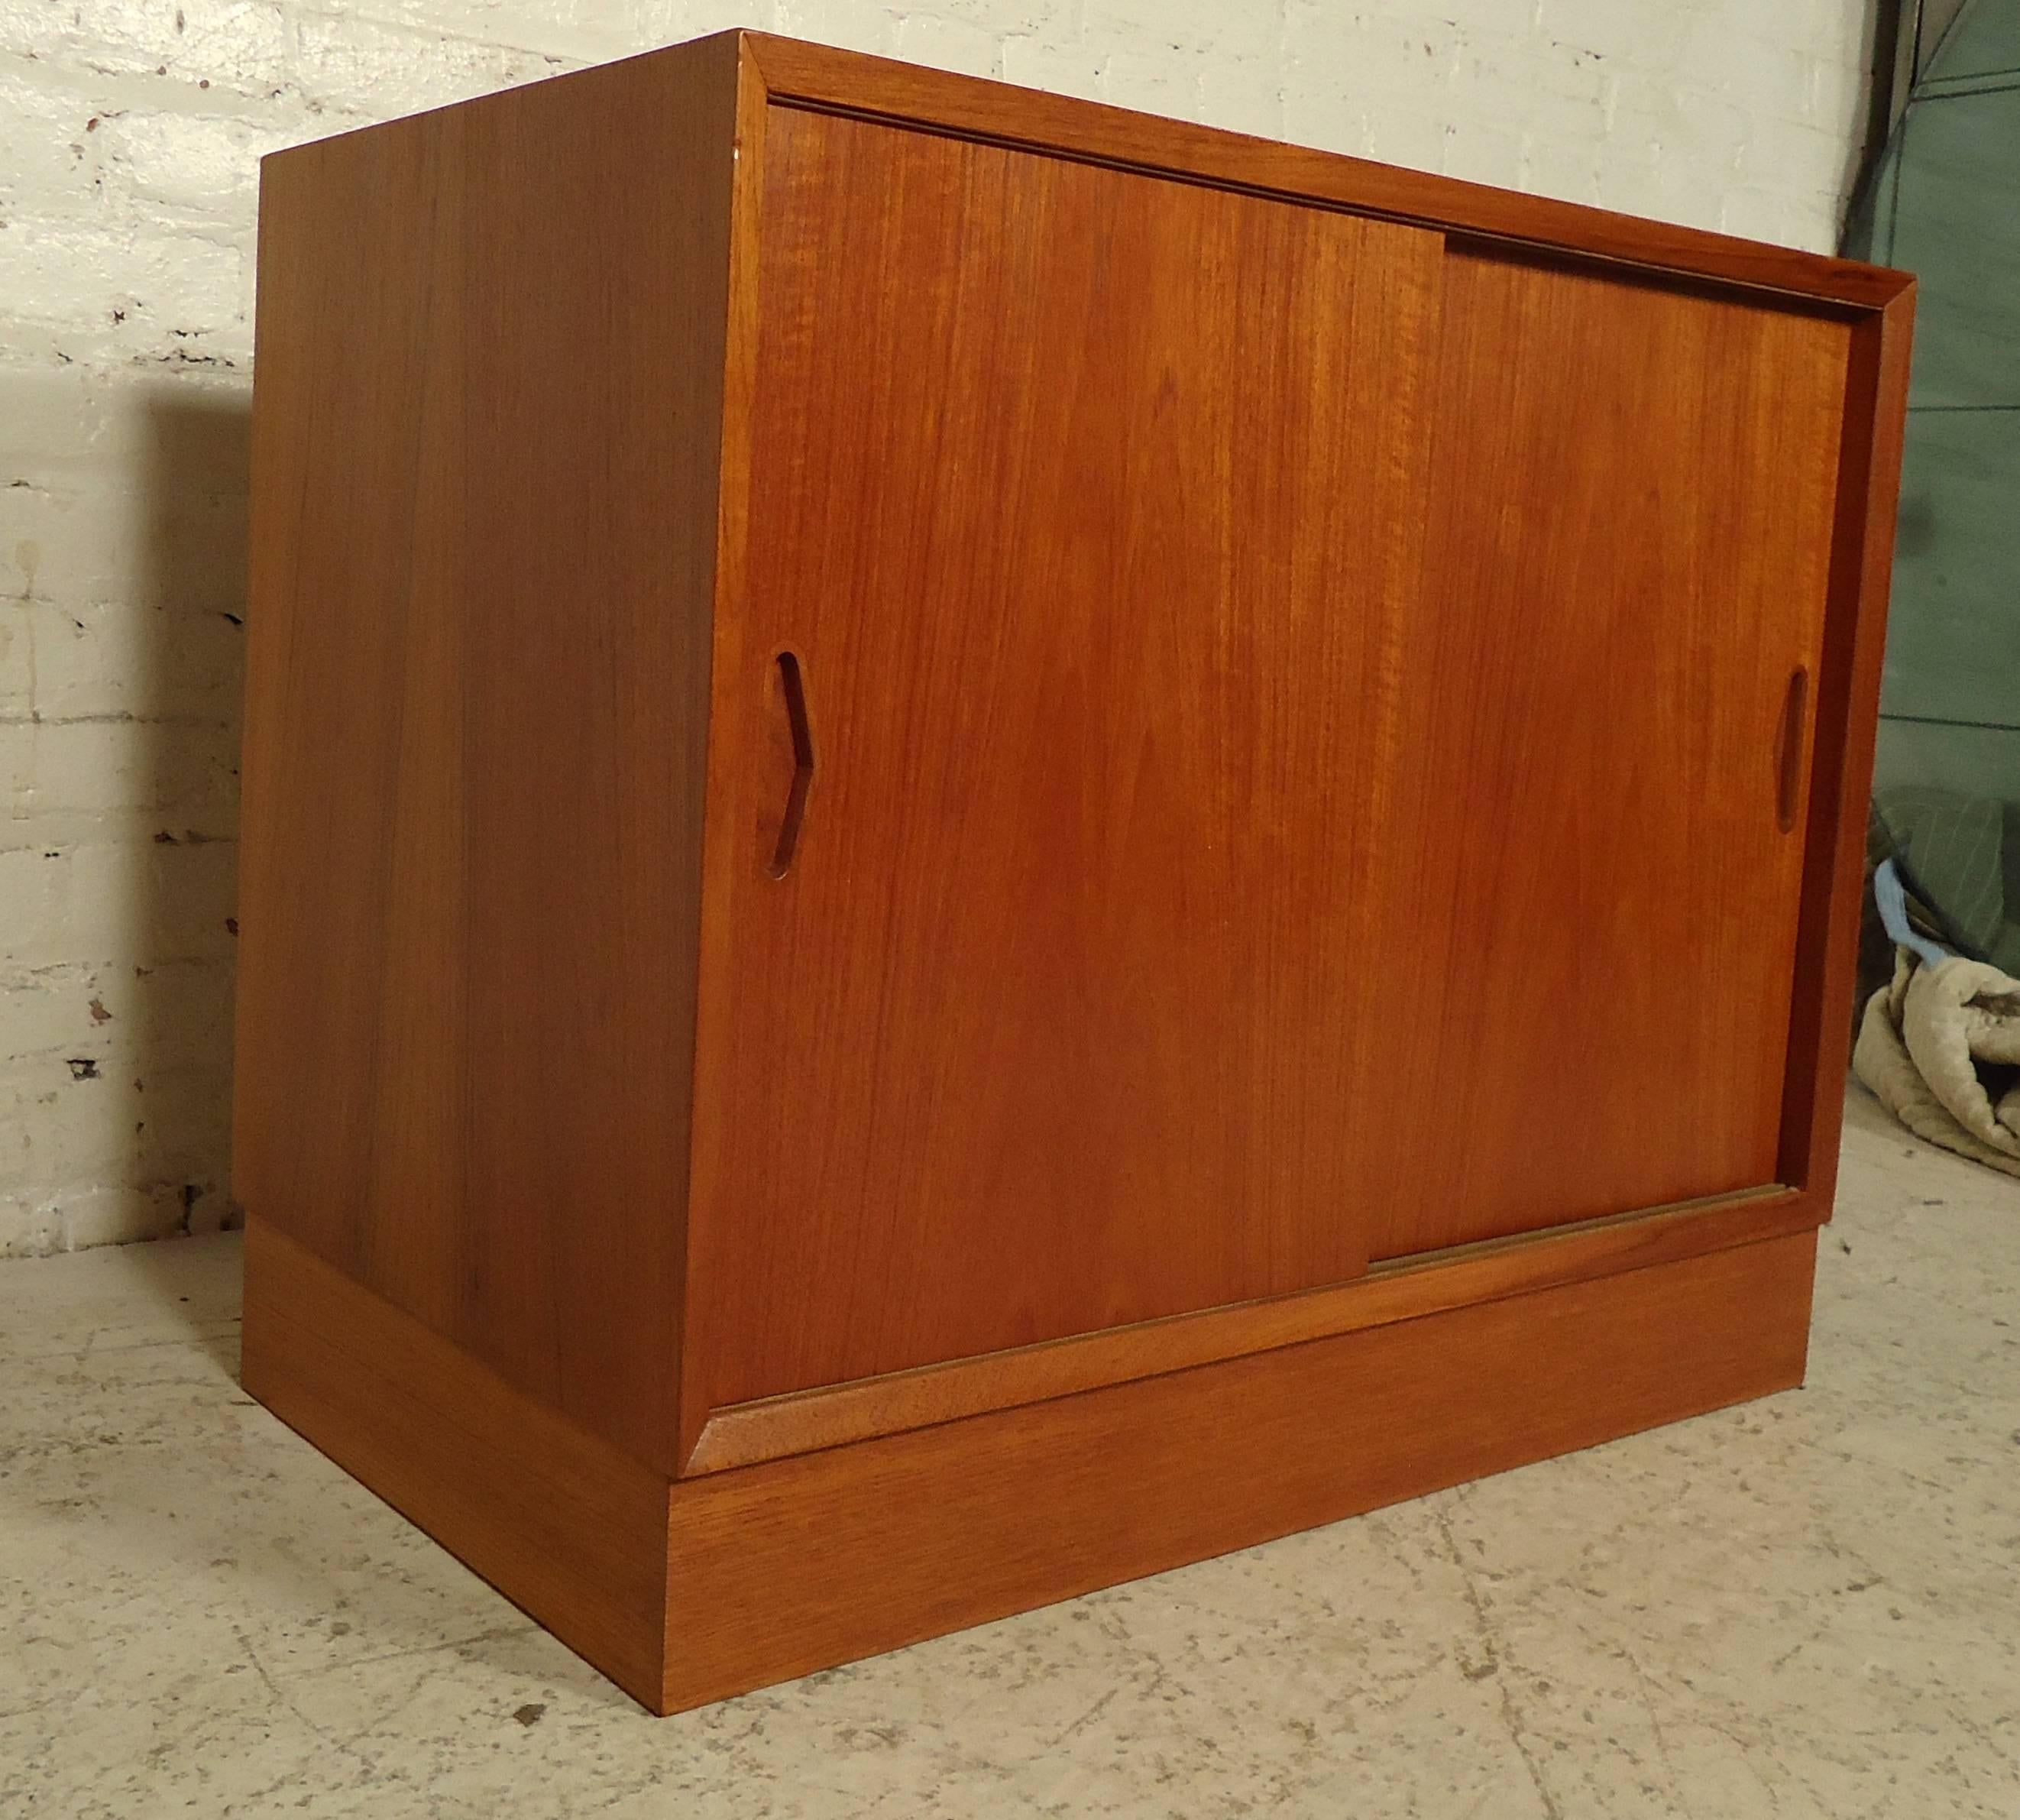 Beautiful vintage-modern cabinet features rich teakwood grain throughout.
Comes with one adjustable shelf and a set of sliding doors with sculpted handles.

(Please confirm item location - NY or NJ - with dealer).